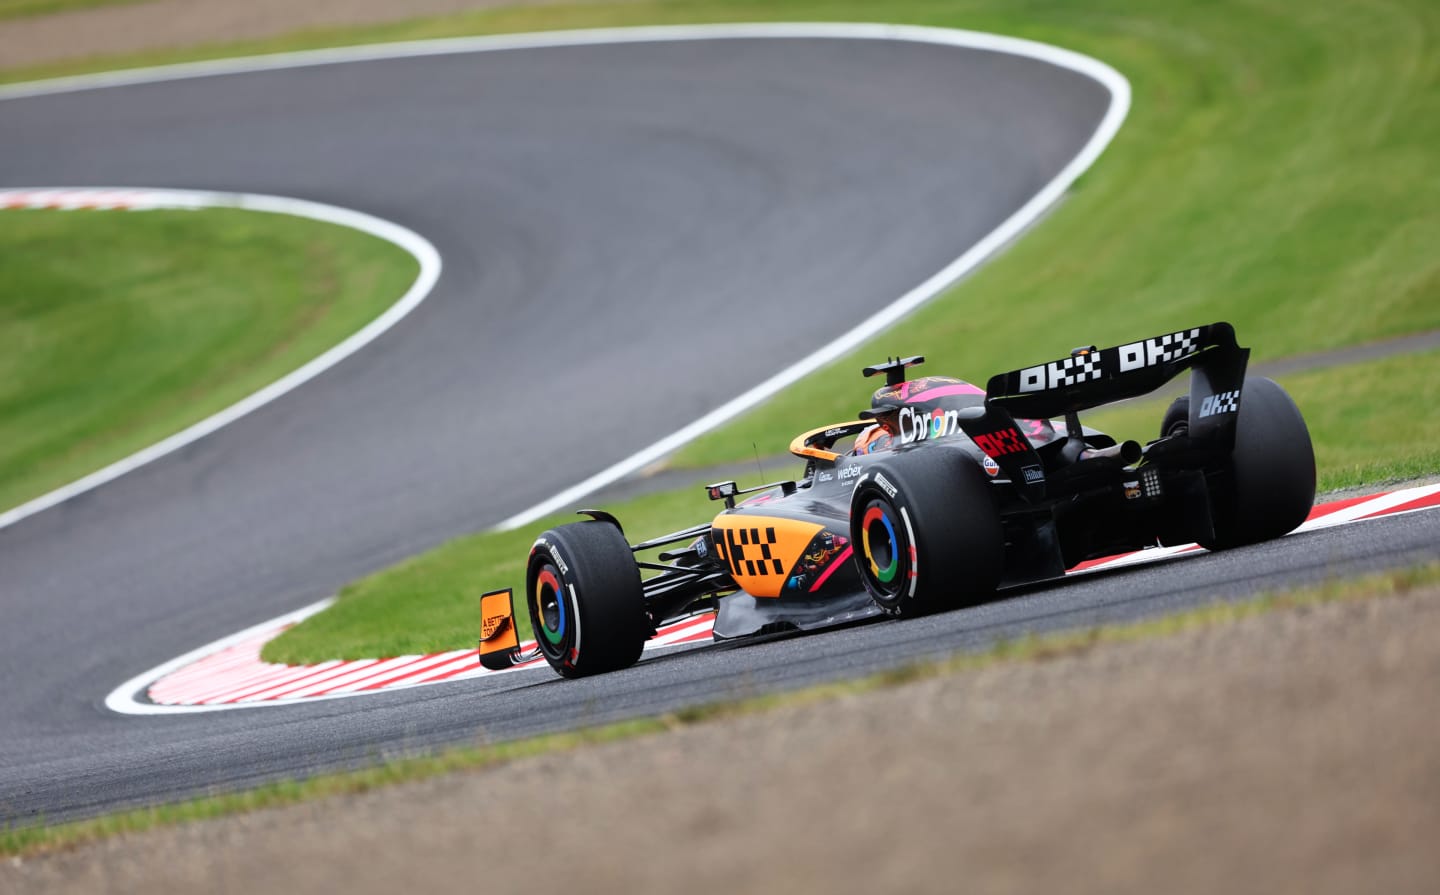 SUZUKA, JAPAN - OCTOBER 08: Daniel Ricciardo of Australia driving the (3) McLaren MCL36 Mercedes on track during final practice ahead of the F1 Grand Prix of Japan at Suzuka International Racing Course on October 08, 2022 in Suzuka, Japan. (Photo by Clive Rose/Getty Images)